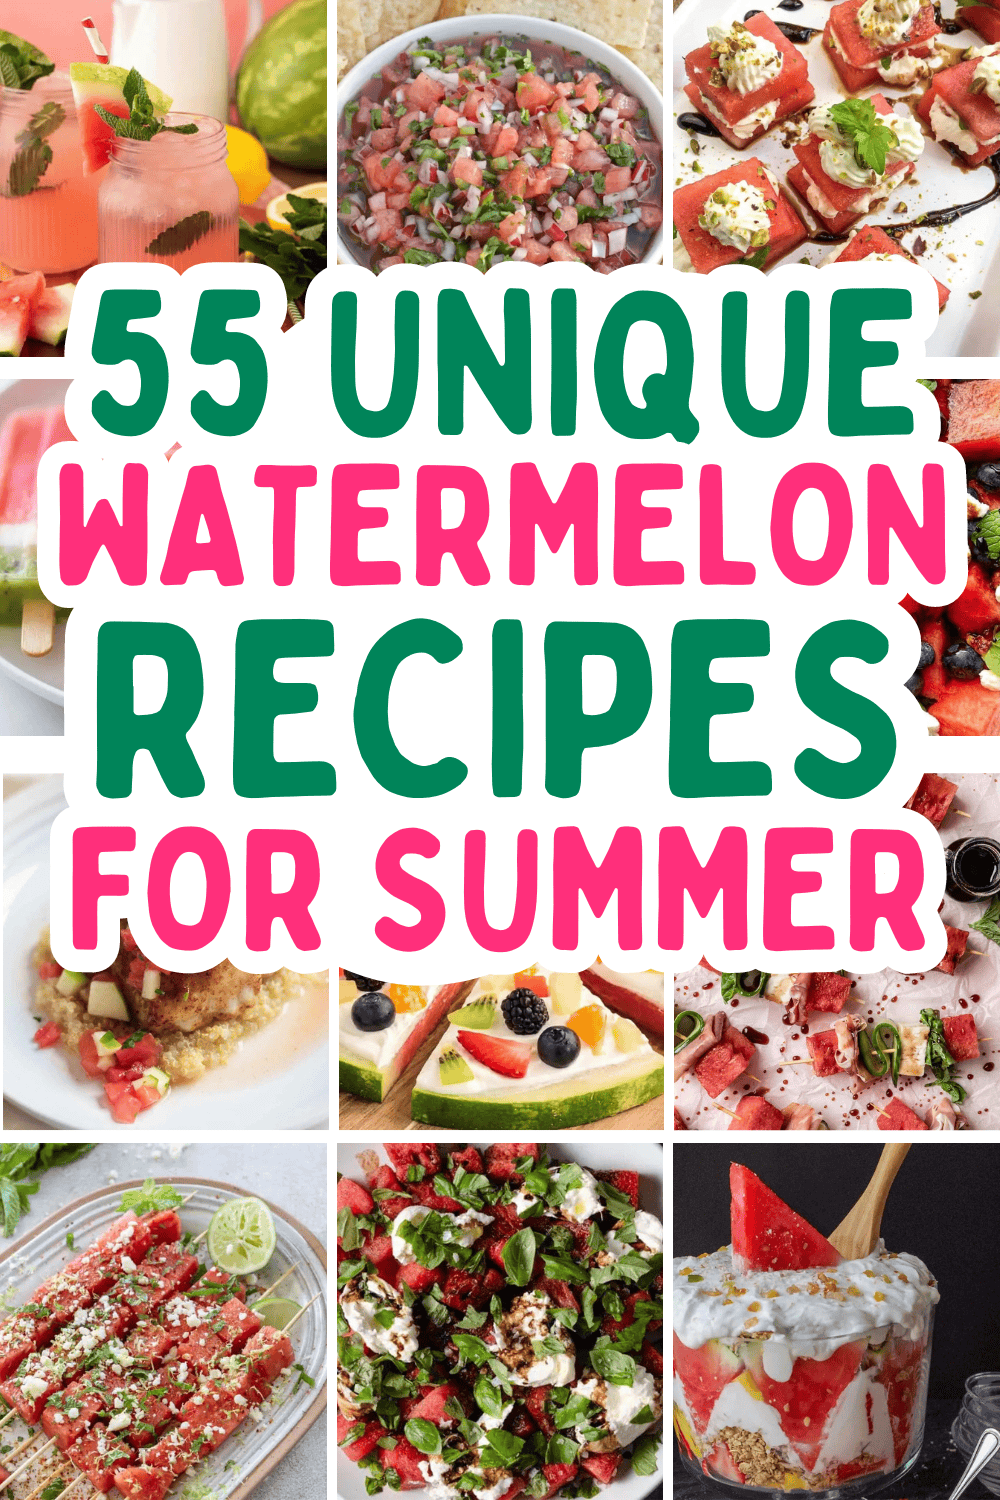 Quick refreshing watermelon recipes for summer! Easy recipes using fresh watermelon like ideas for summer salads, watermelon dessert, homemade juice, drinks and smoothies, healthy summer snacks for kids, savory appetizers, breakfast fruit recipes, and even grill dinners. Watermelon recipes aesthetic, watermelon themed cake, pie, frozen watermelon mocktails, fresh watermelon recipes salad, unripe watermelon recipes, watermelon appetizer, watermelon recipes dessert, italian ice, rind, skewers.